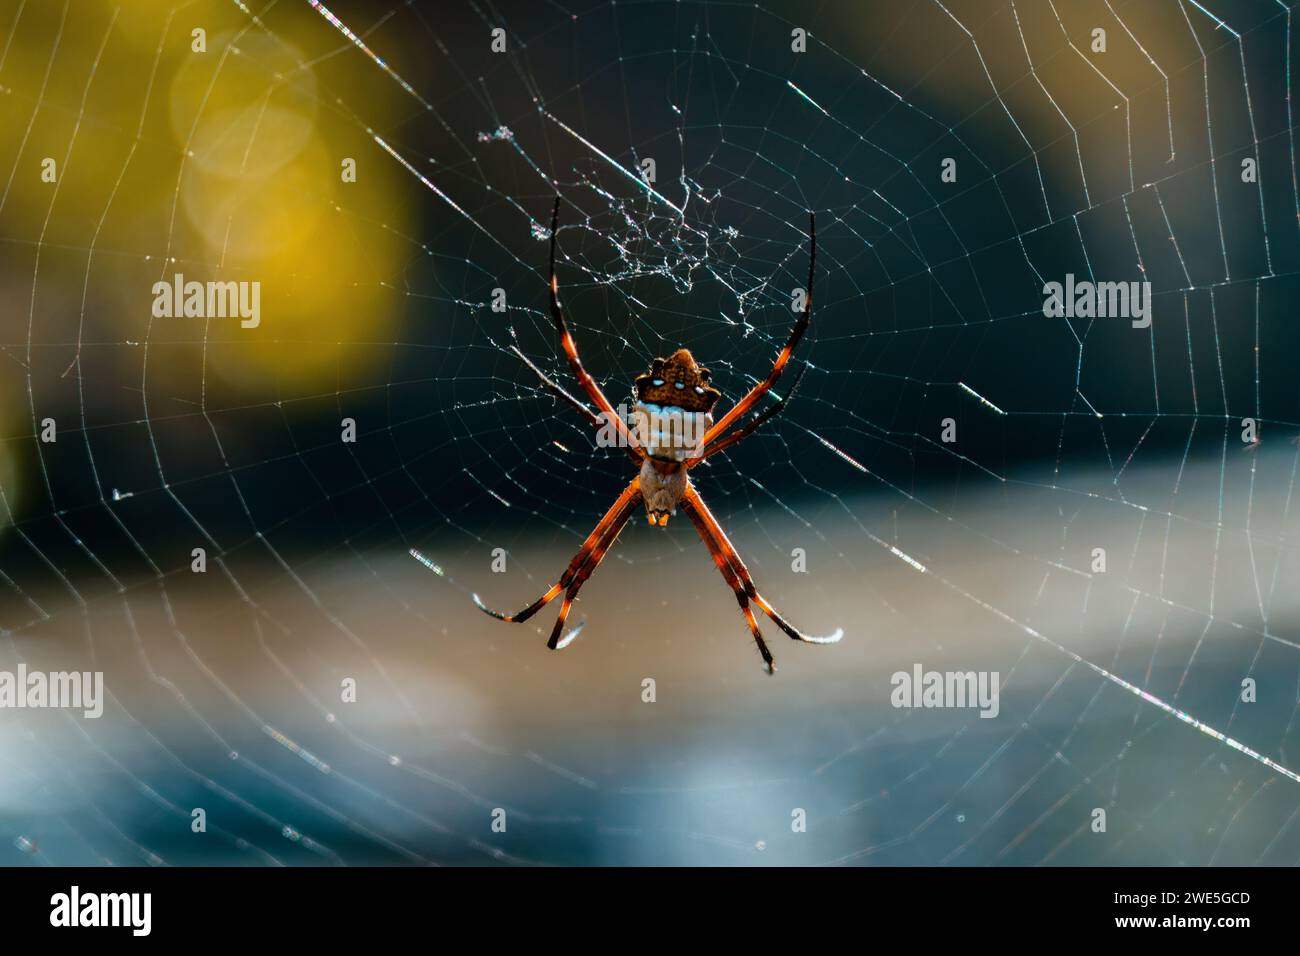 Photo of a Tiger Spider, Argiope Argentata, in a web. Stock Photo